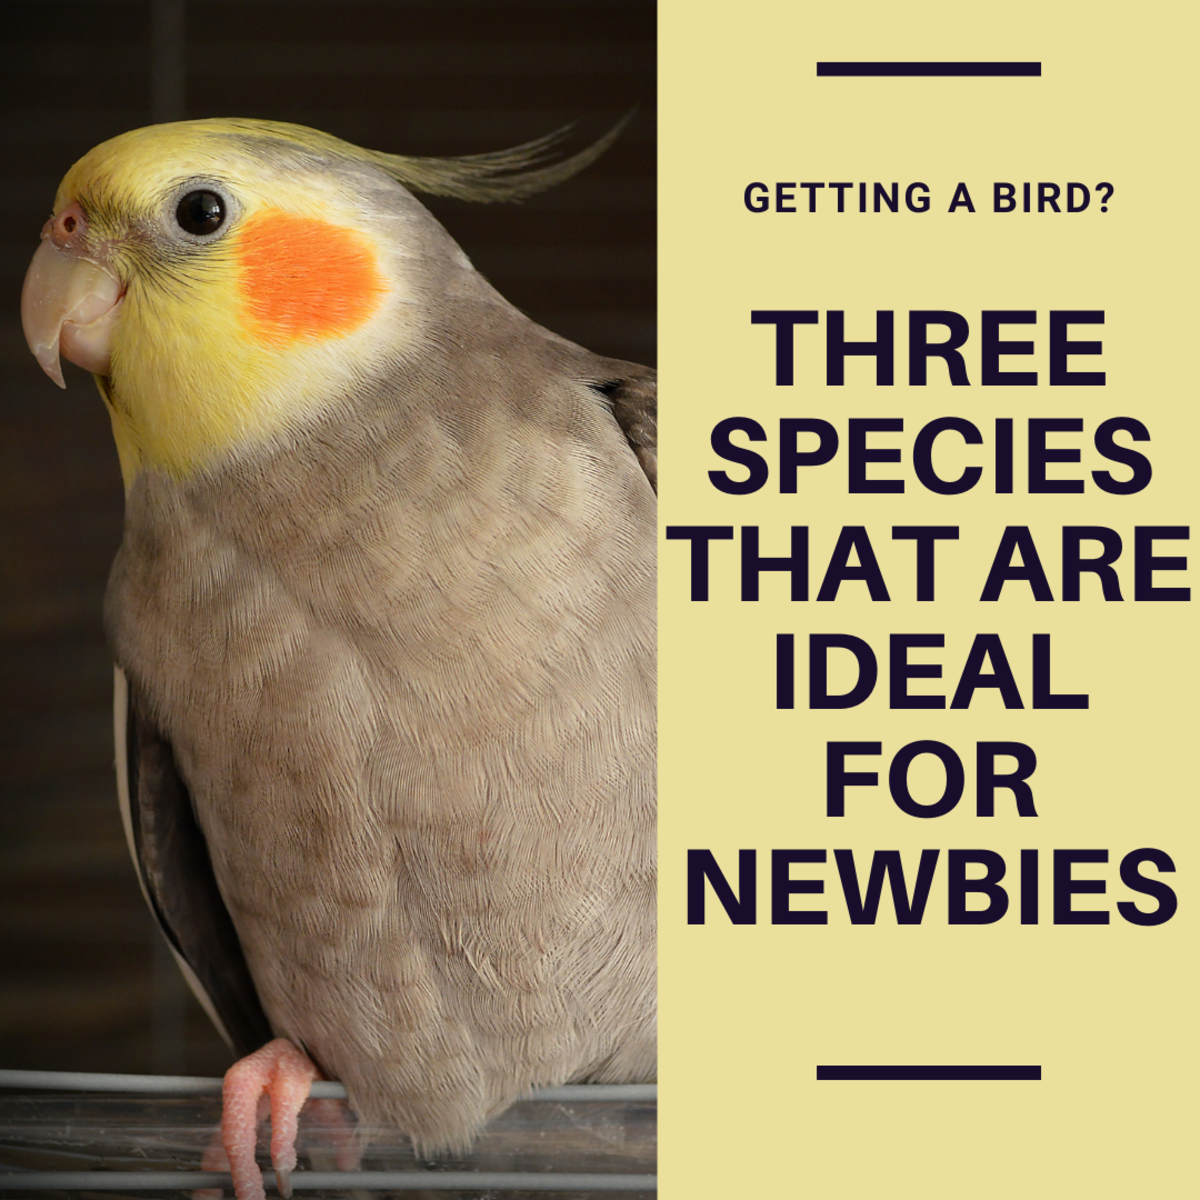 For a budding bird owner, the author recommends three bird species for pets for beginners.